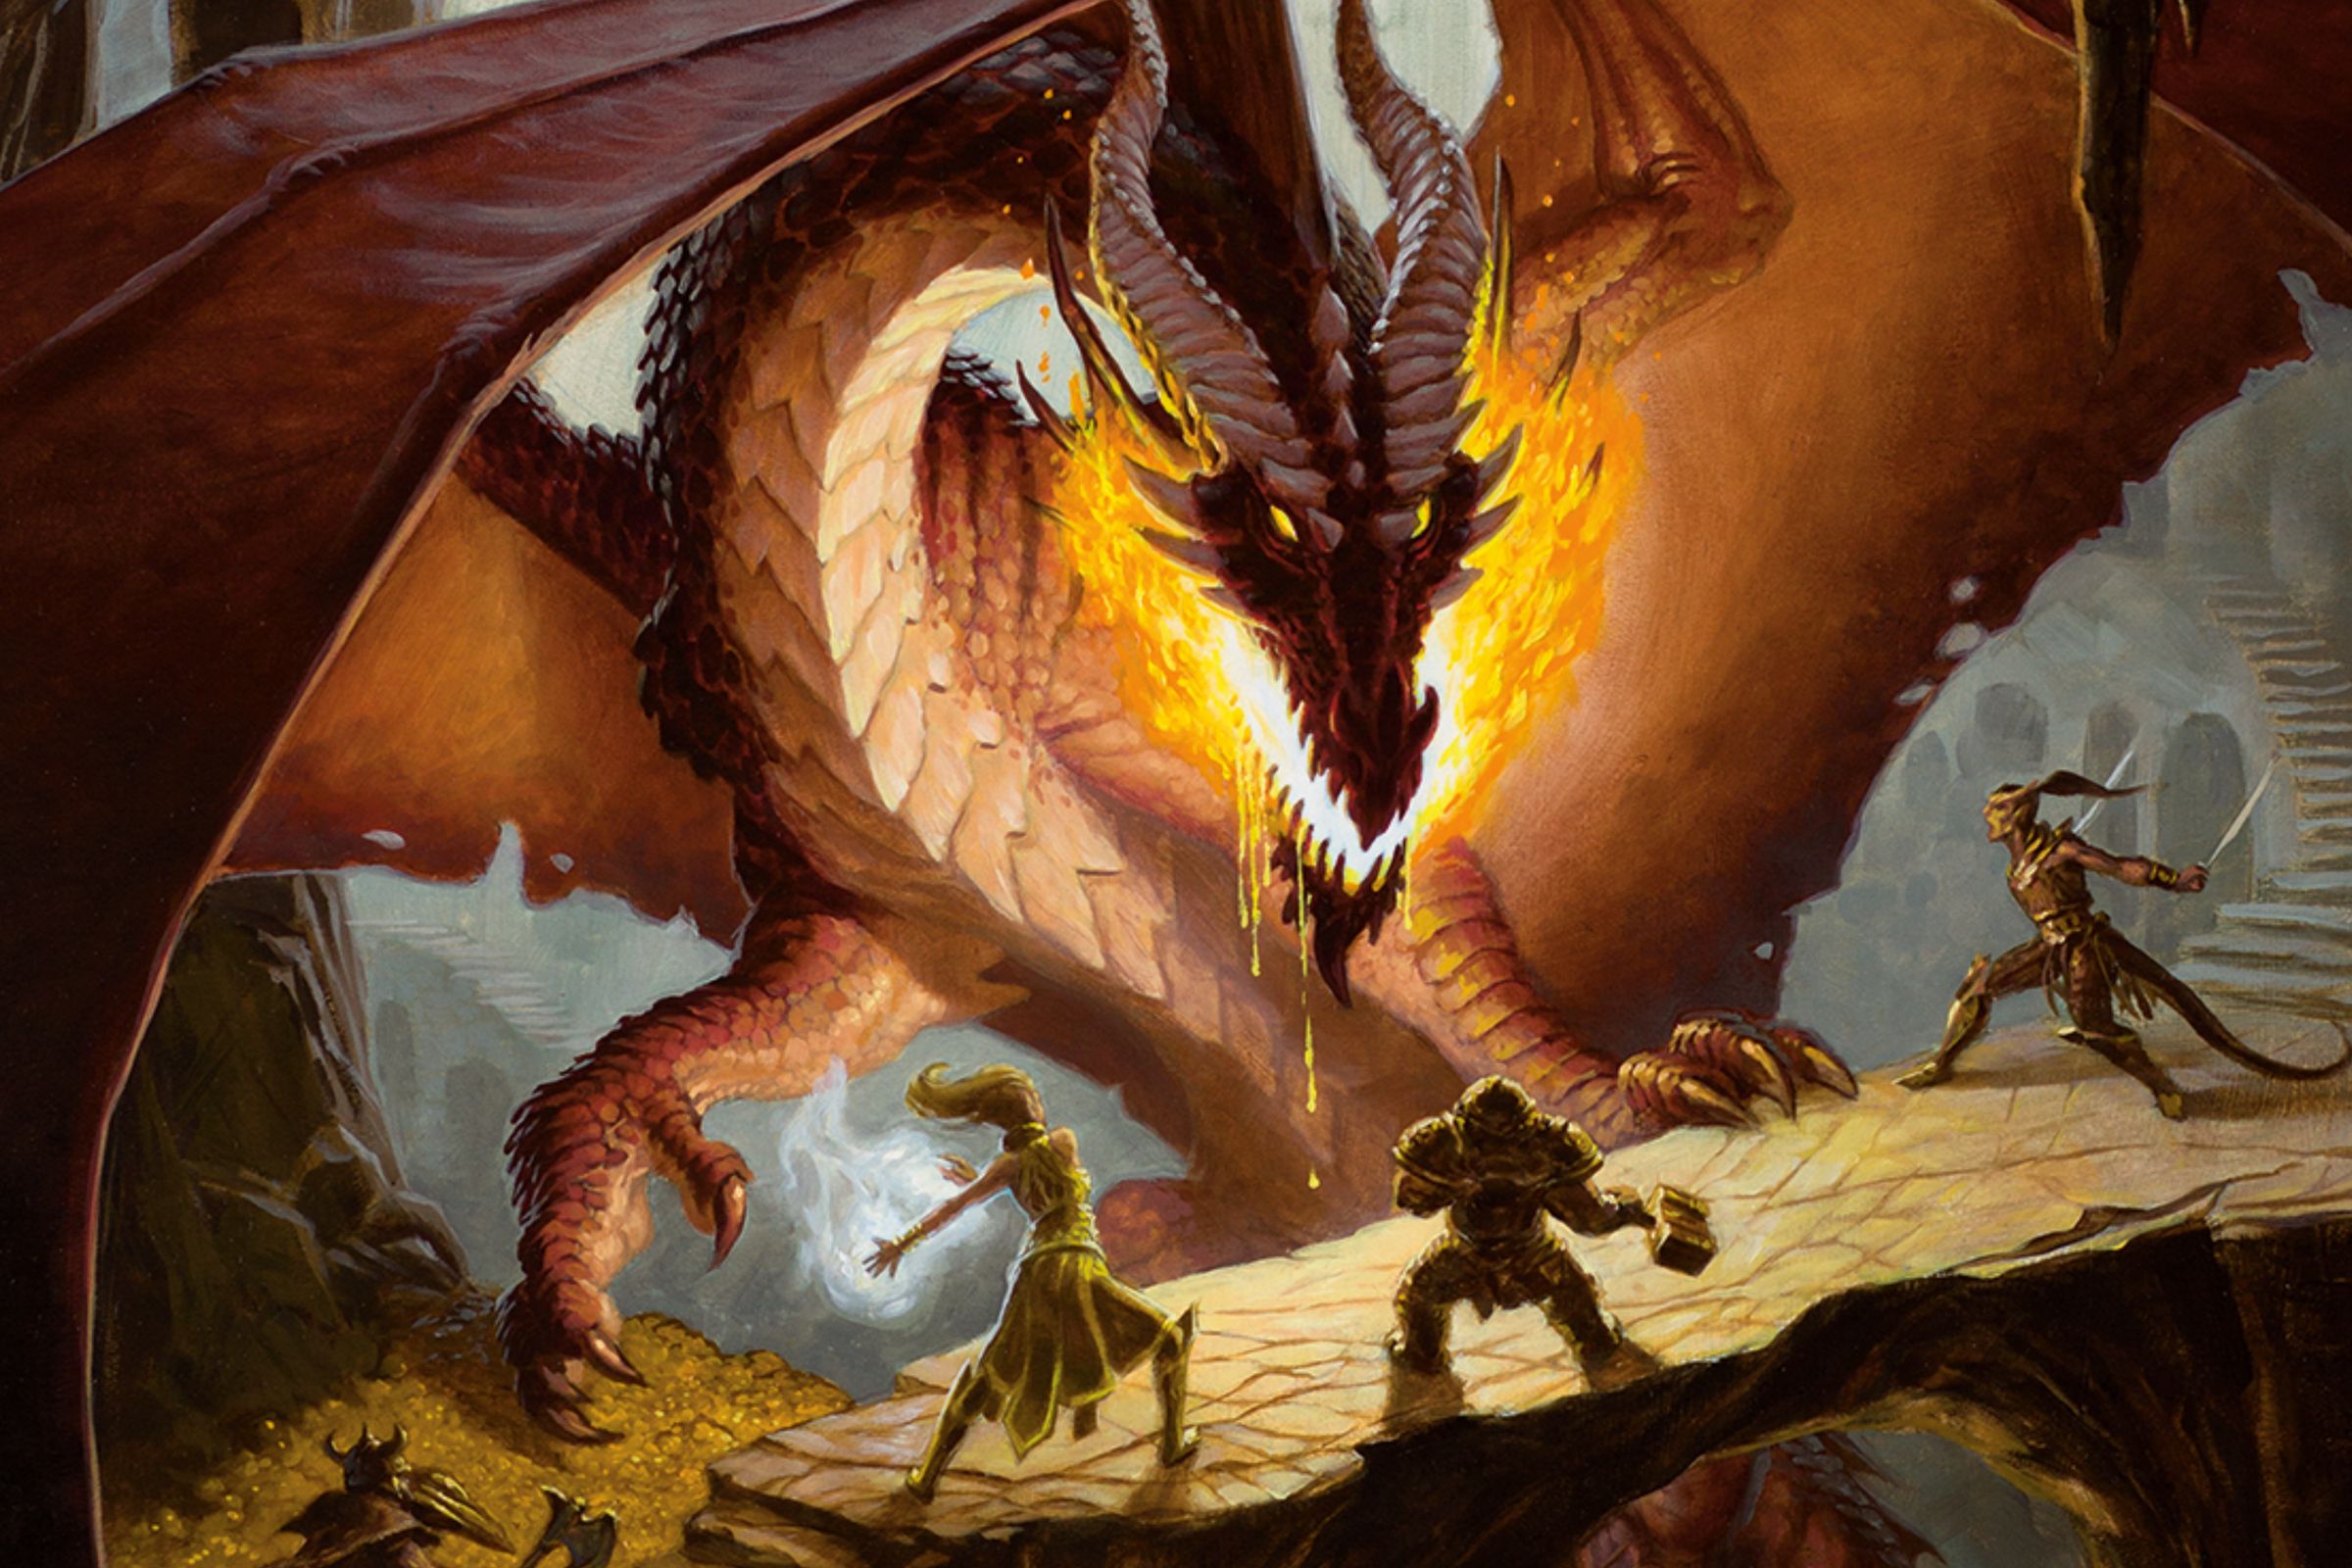 Official art from the Dungeons &amp; Dragons tabletop roleplaying game depicting a party of adventurers fighting a large red dragon in a dungeon.